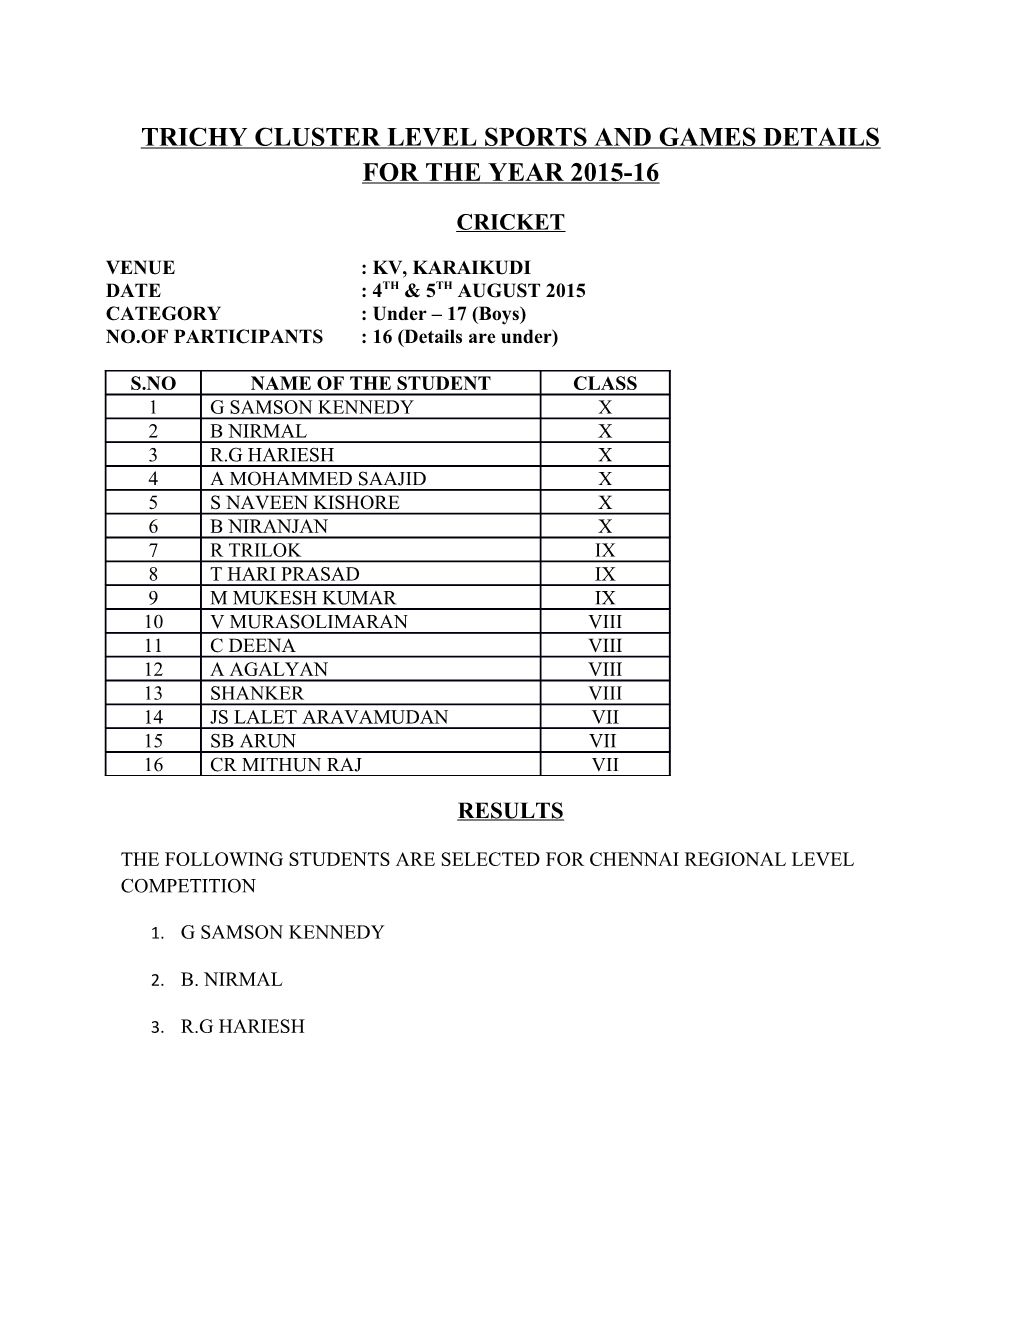 Trichy Cluster Level Sports and Games Details for the Year 2015-16